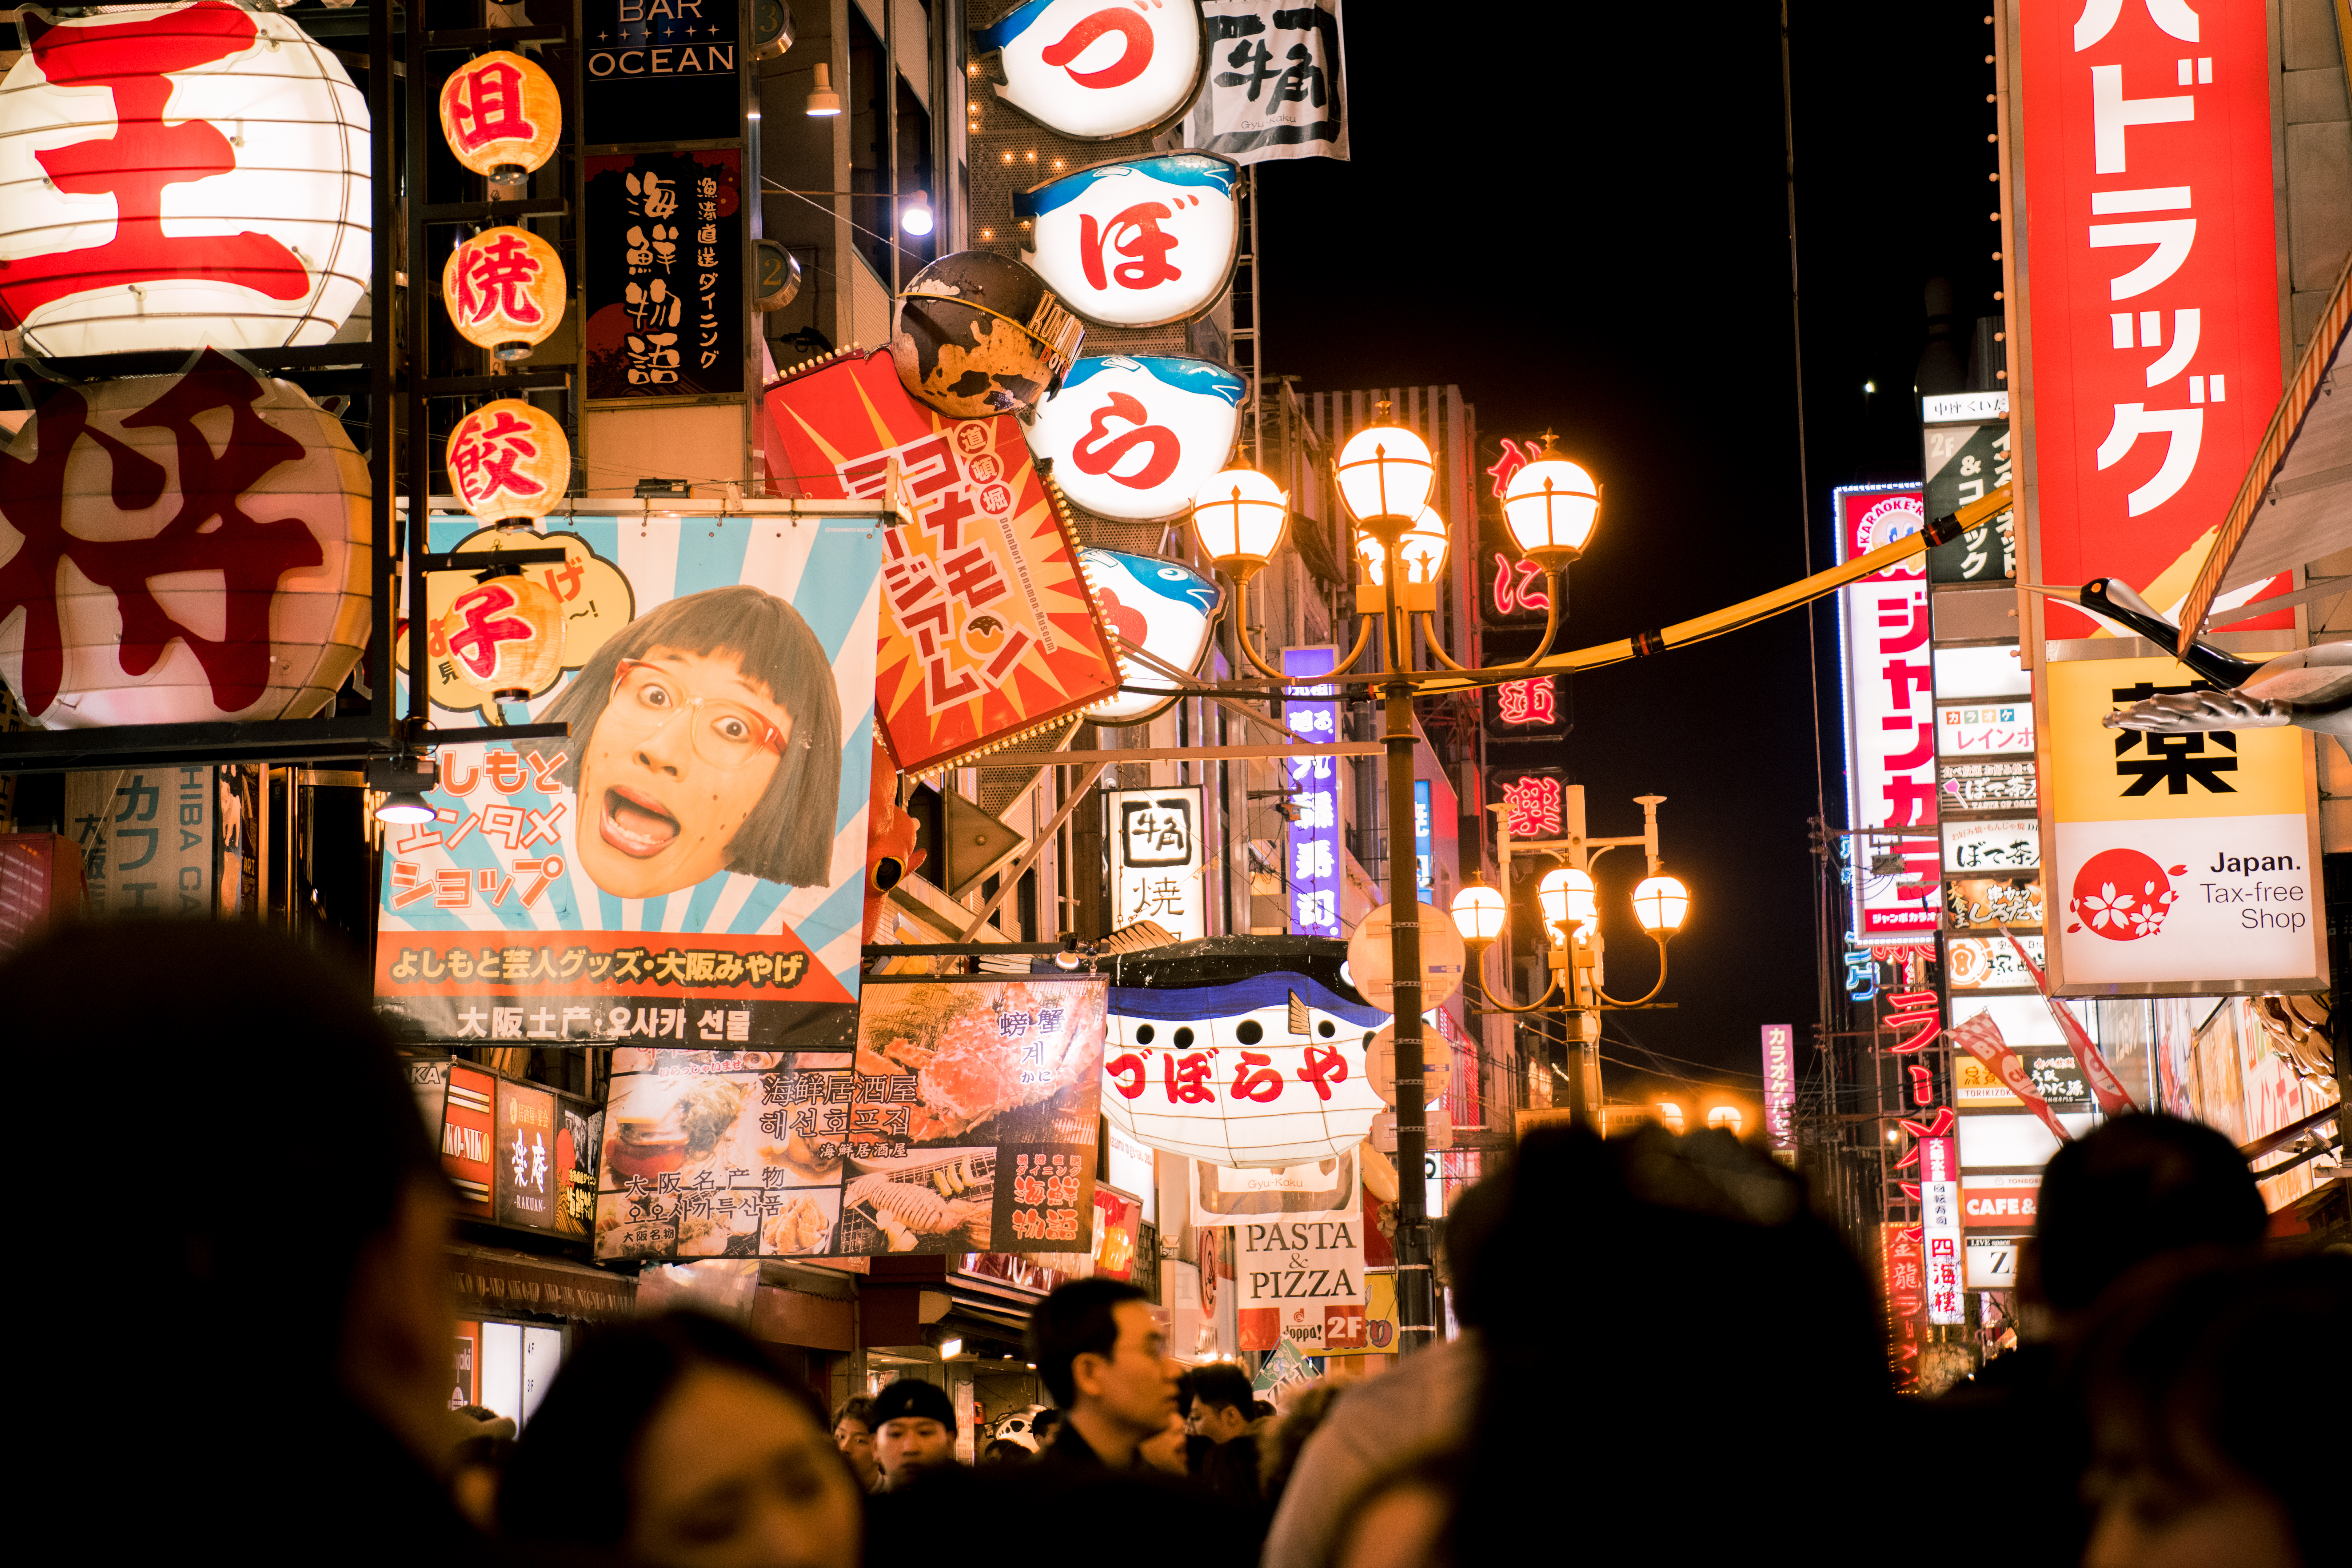 Could Japan be the Next Casino Travel Destination of Asia?